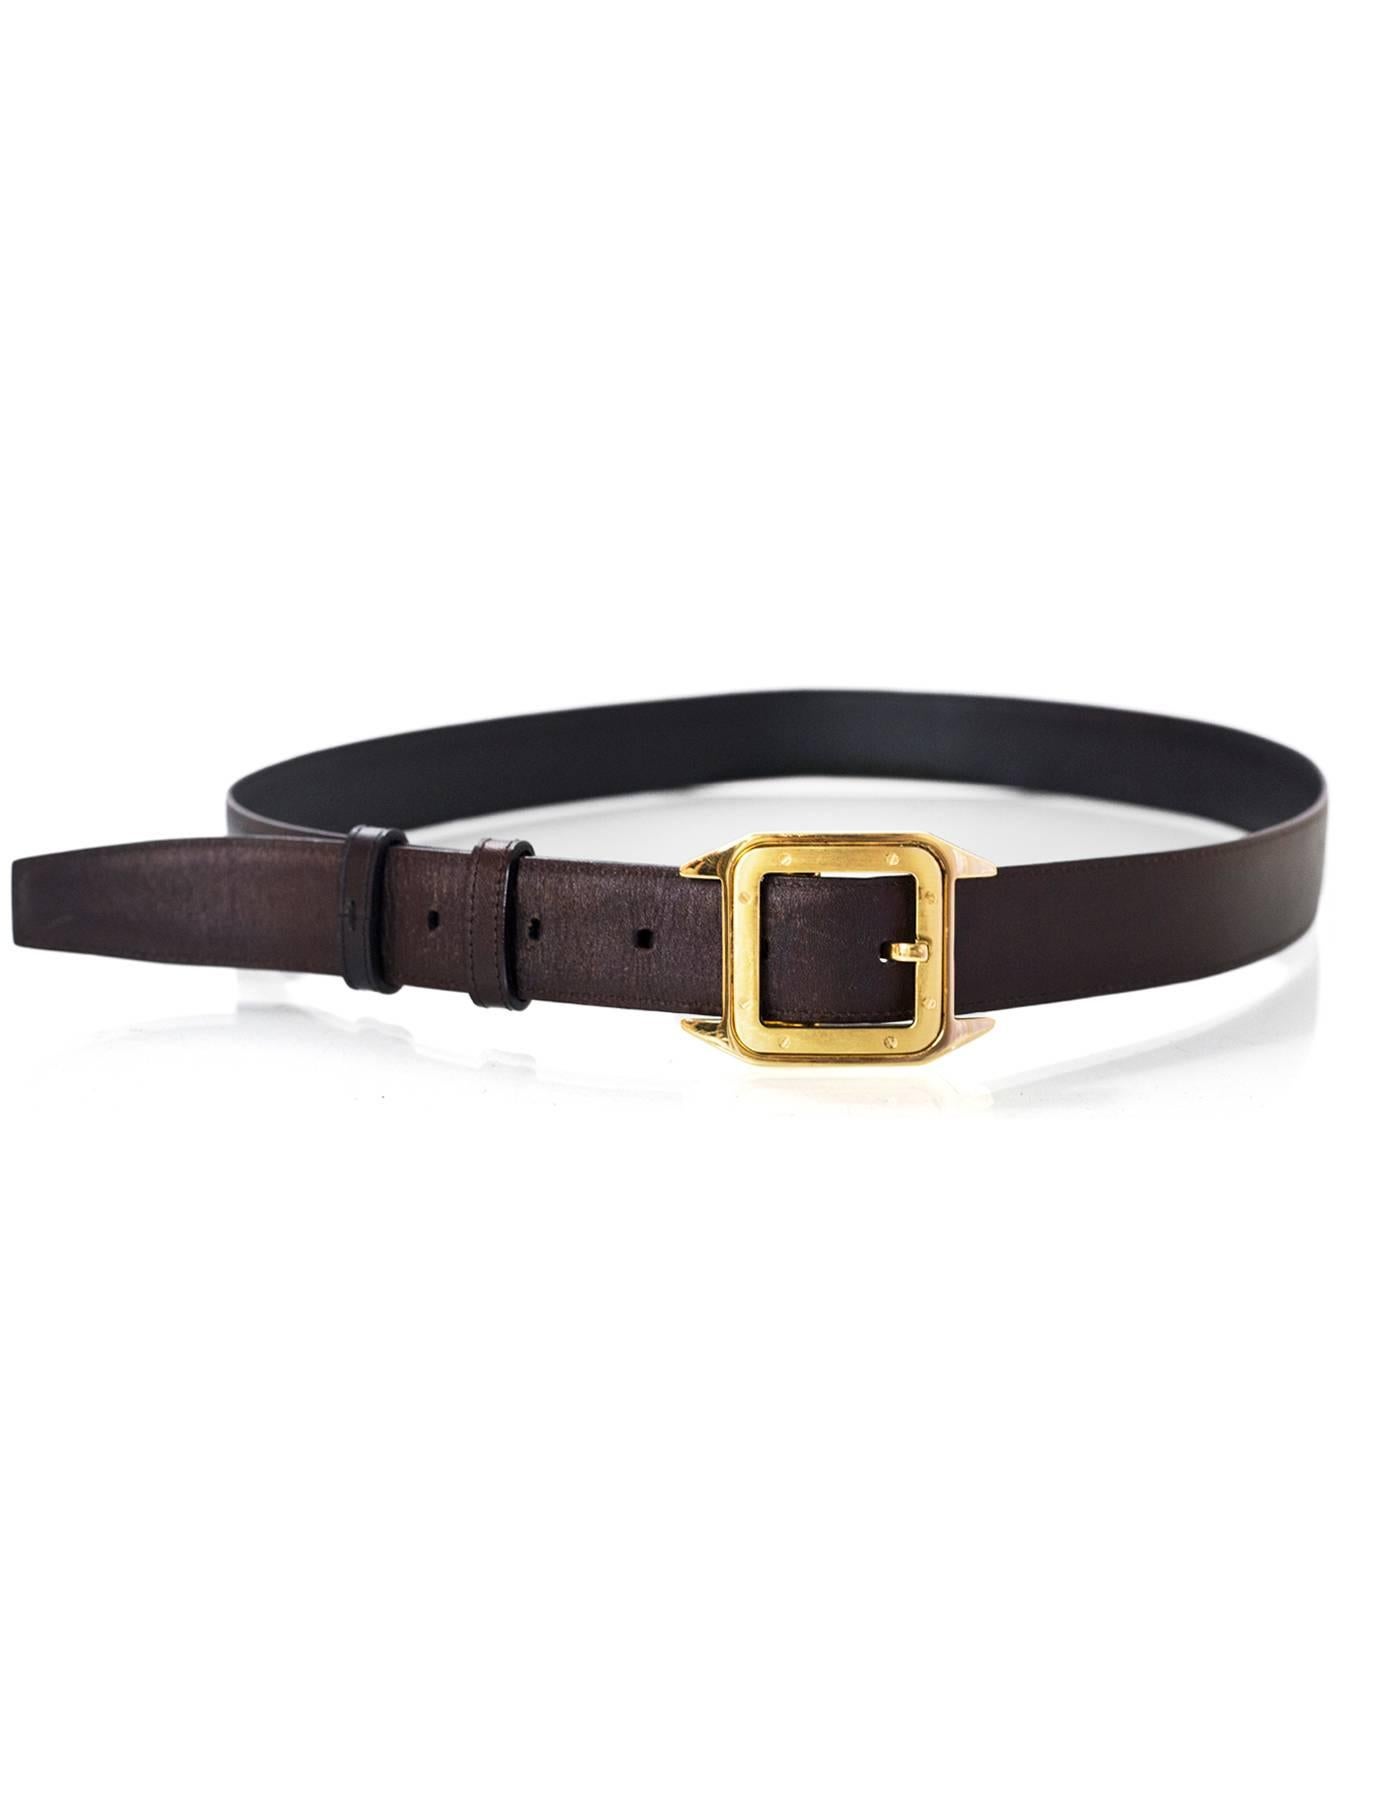 Cartier Men's Brown & Black Leather Reversible Santos Belt Sz 90

Color: Black, brown, gold
Materials: Leather, metal
Closure/Opening: Buckle closure
Stamp: Cartier Paris
Retail Price: $615 + tax
Overall Condition: Excellent pre-owned condition